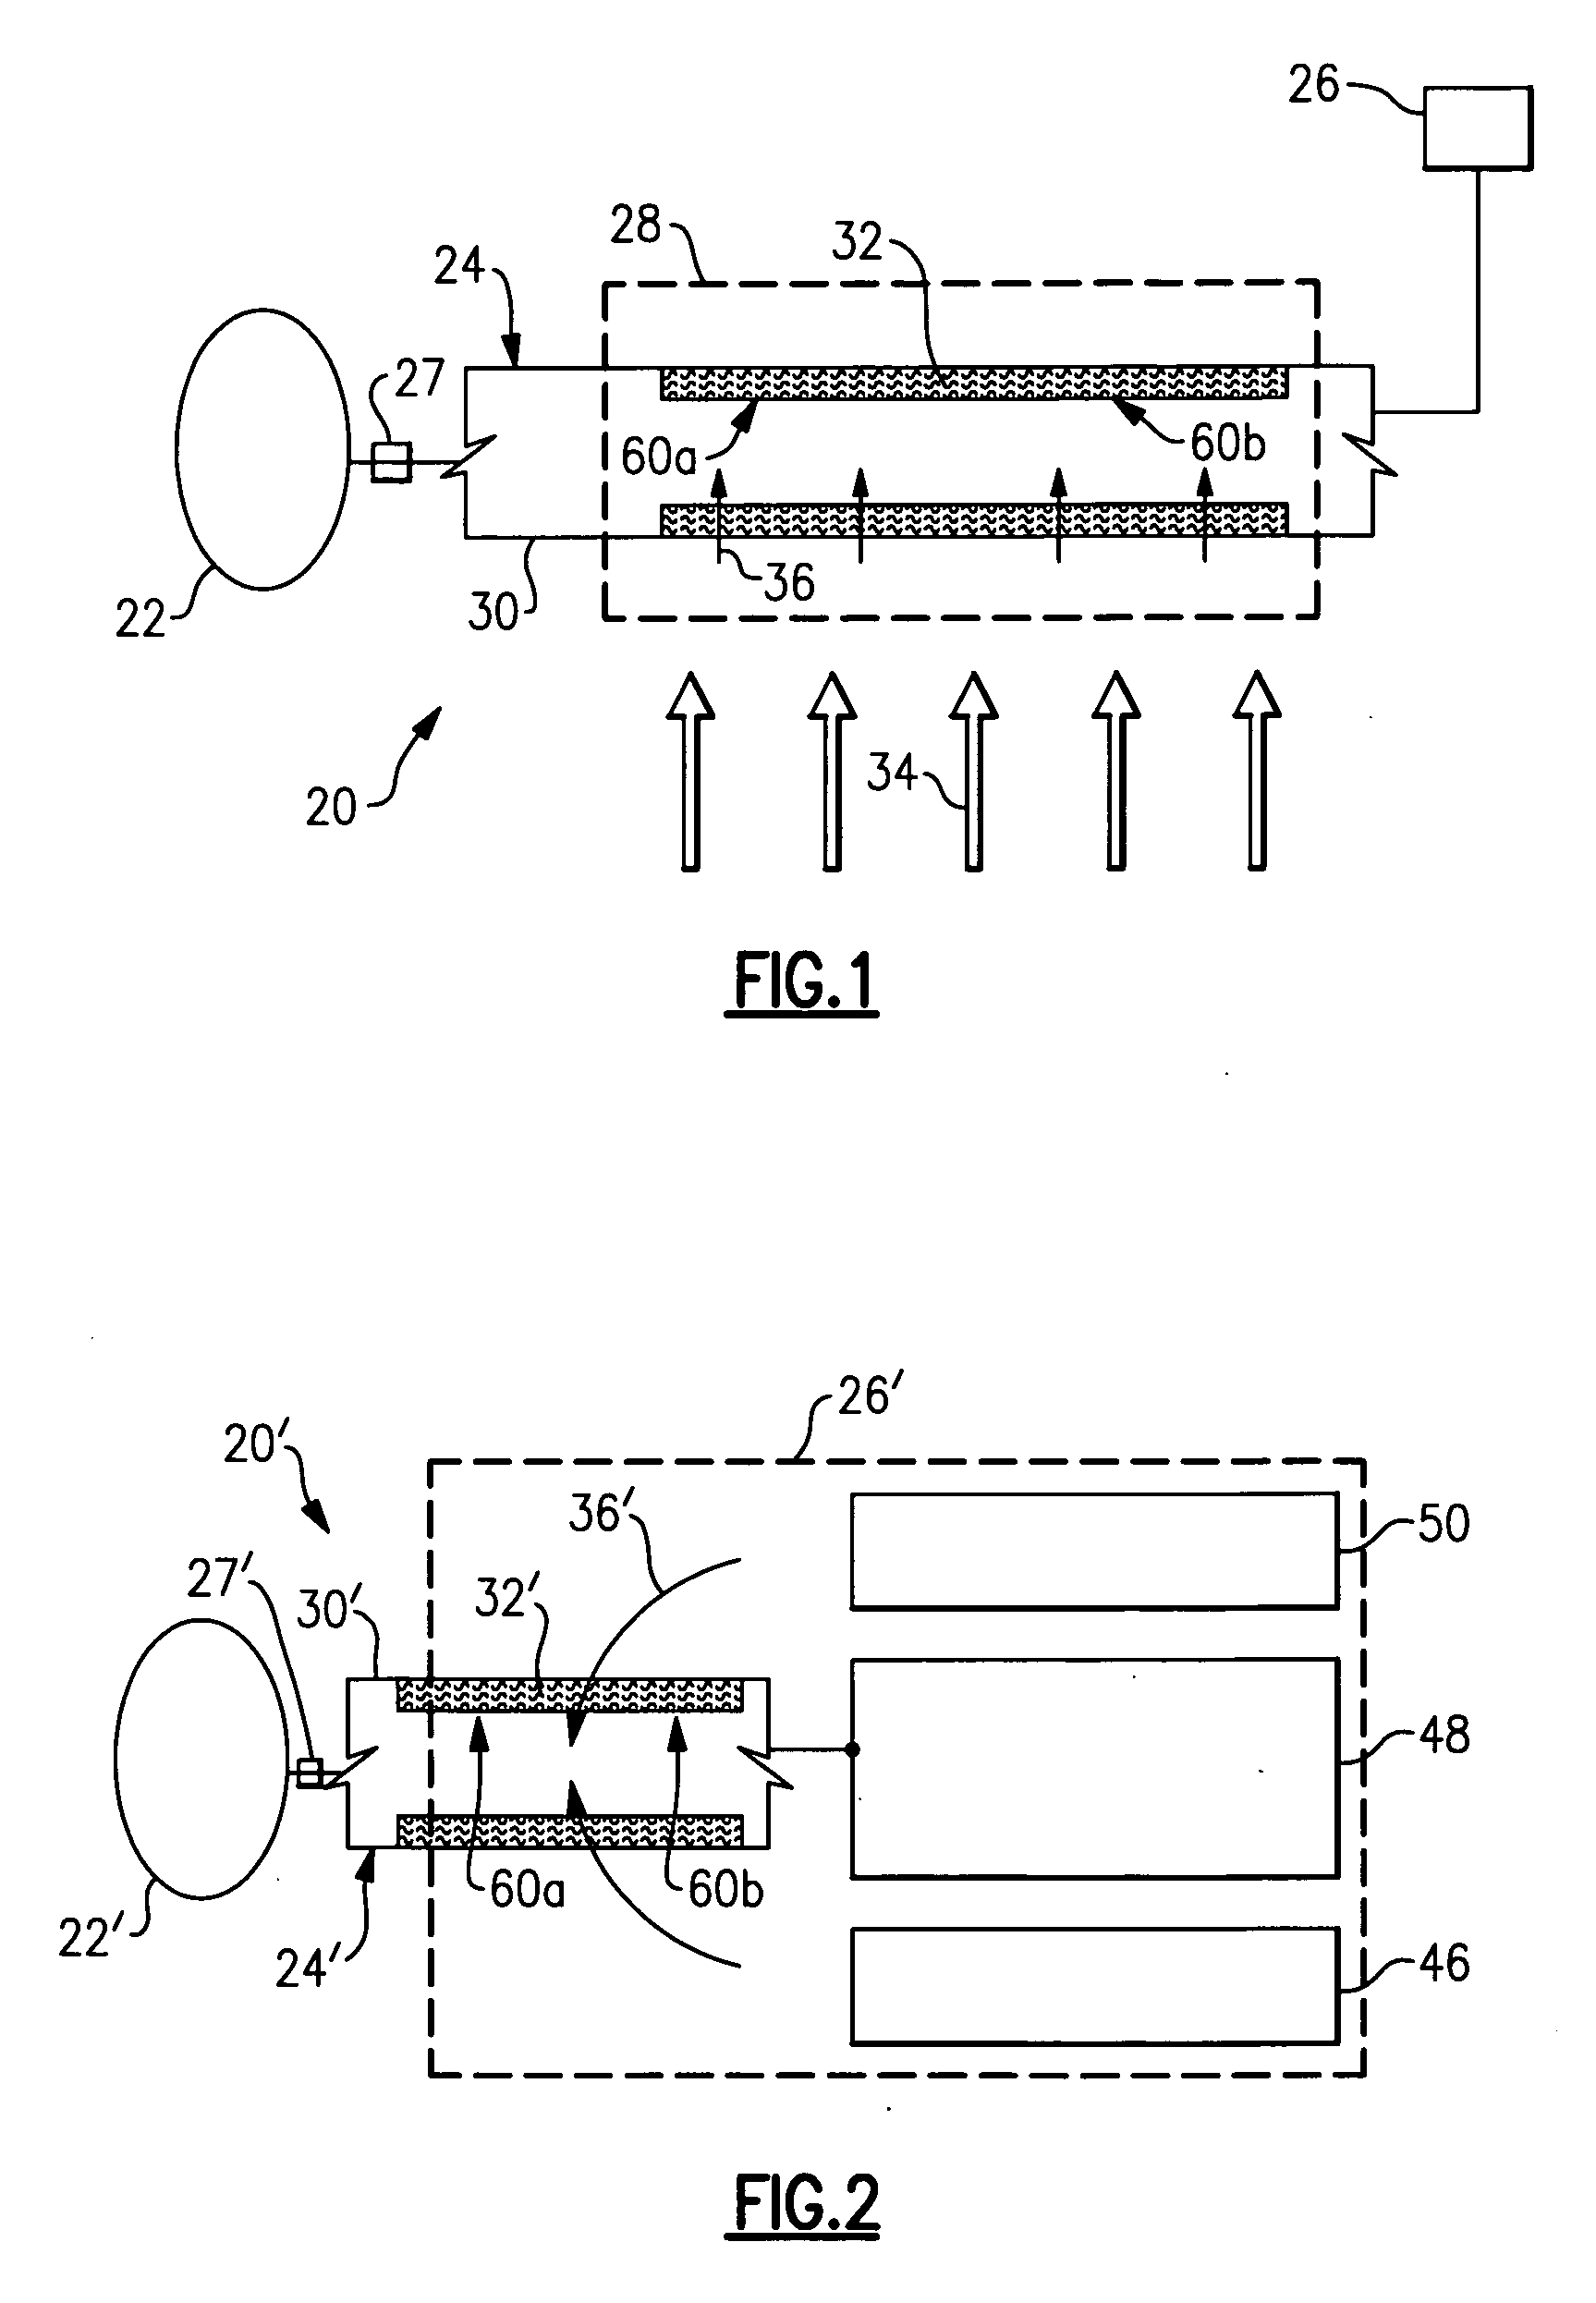 Endothermic cracking aircraft fuel system